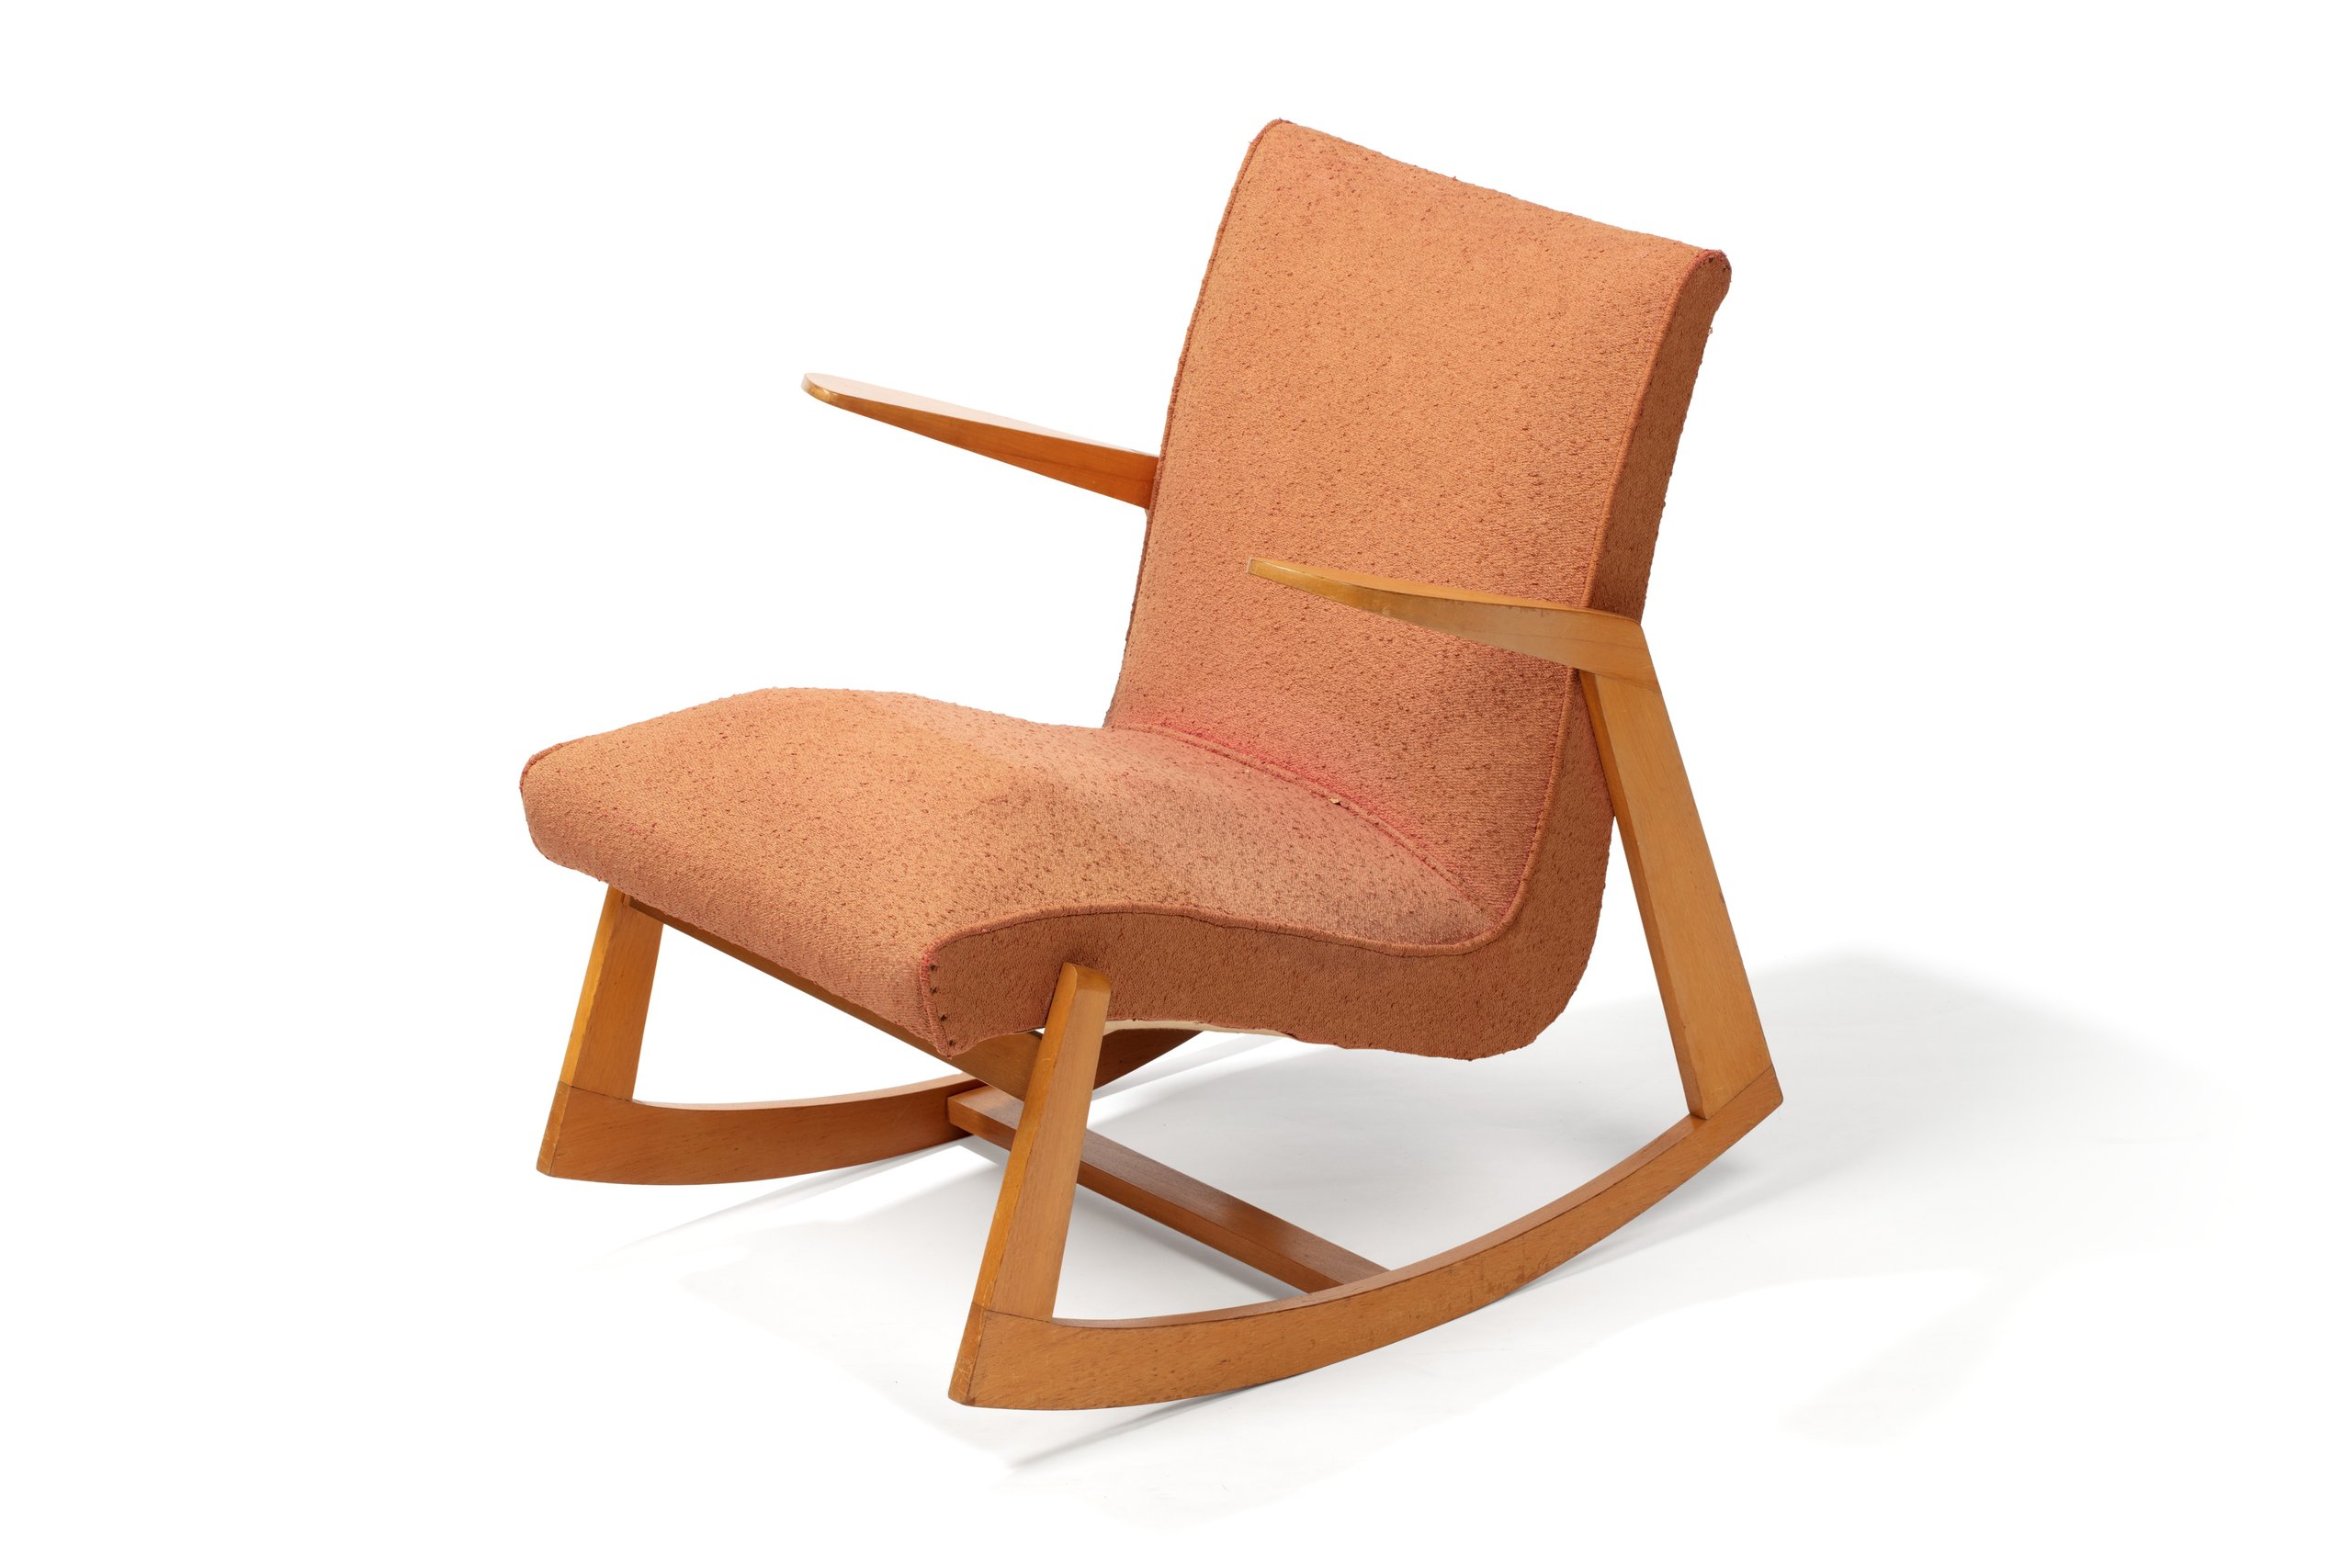 Rocking chair by Douglas Snelling